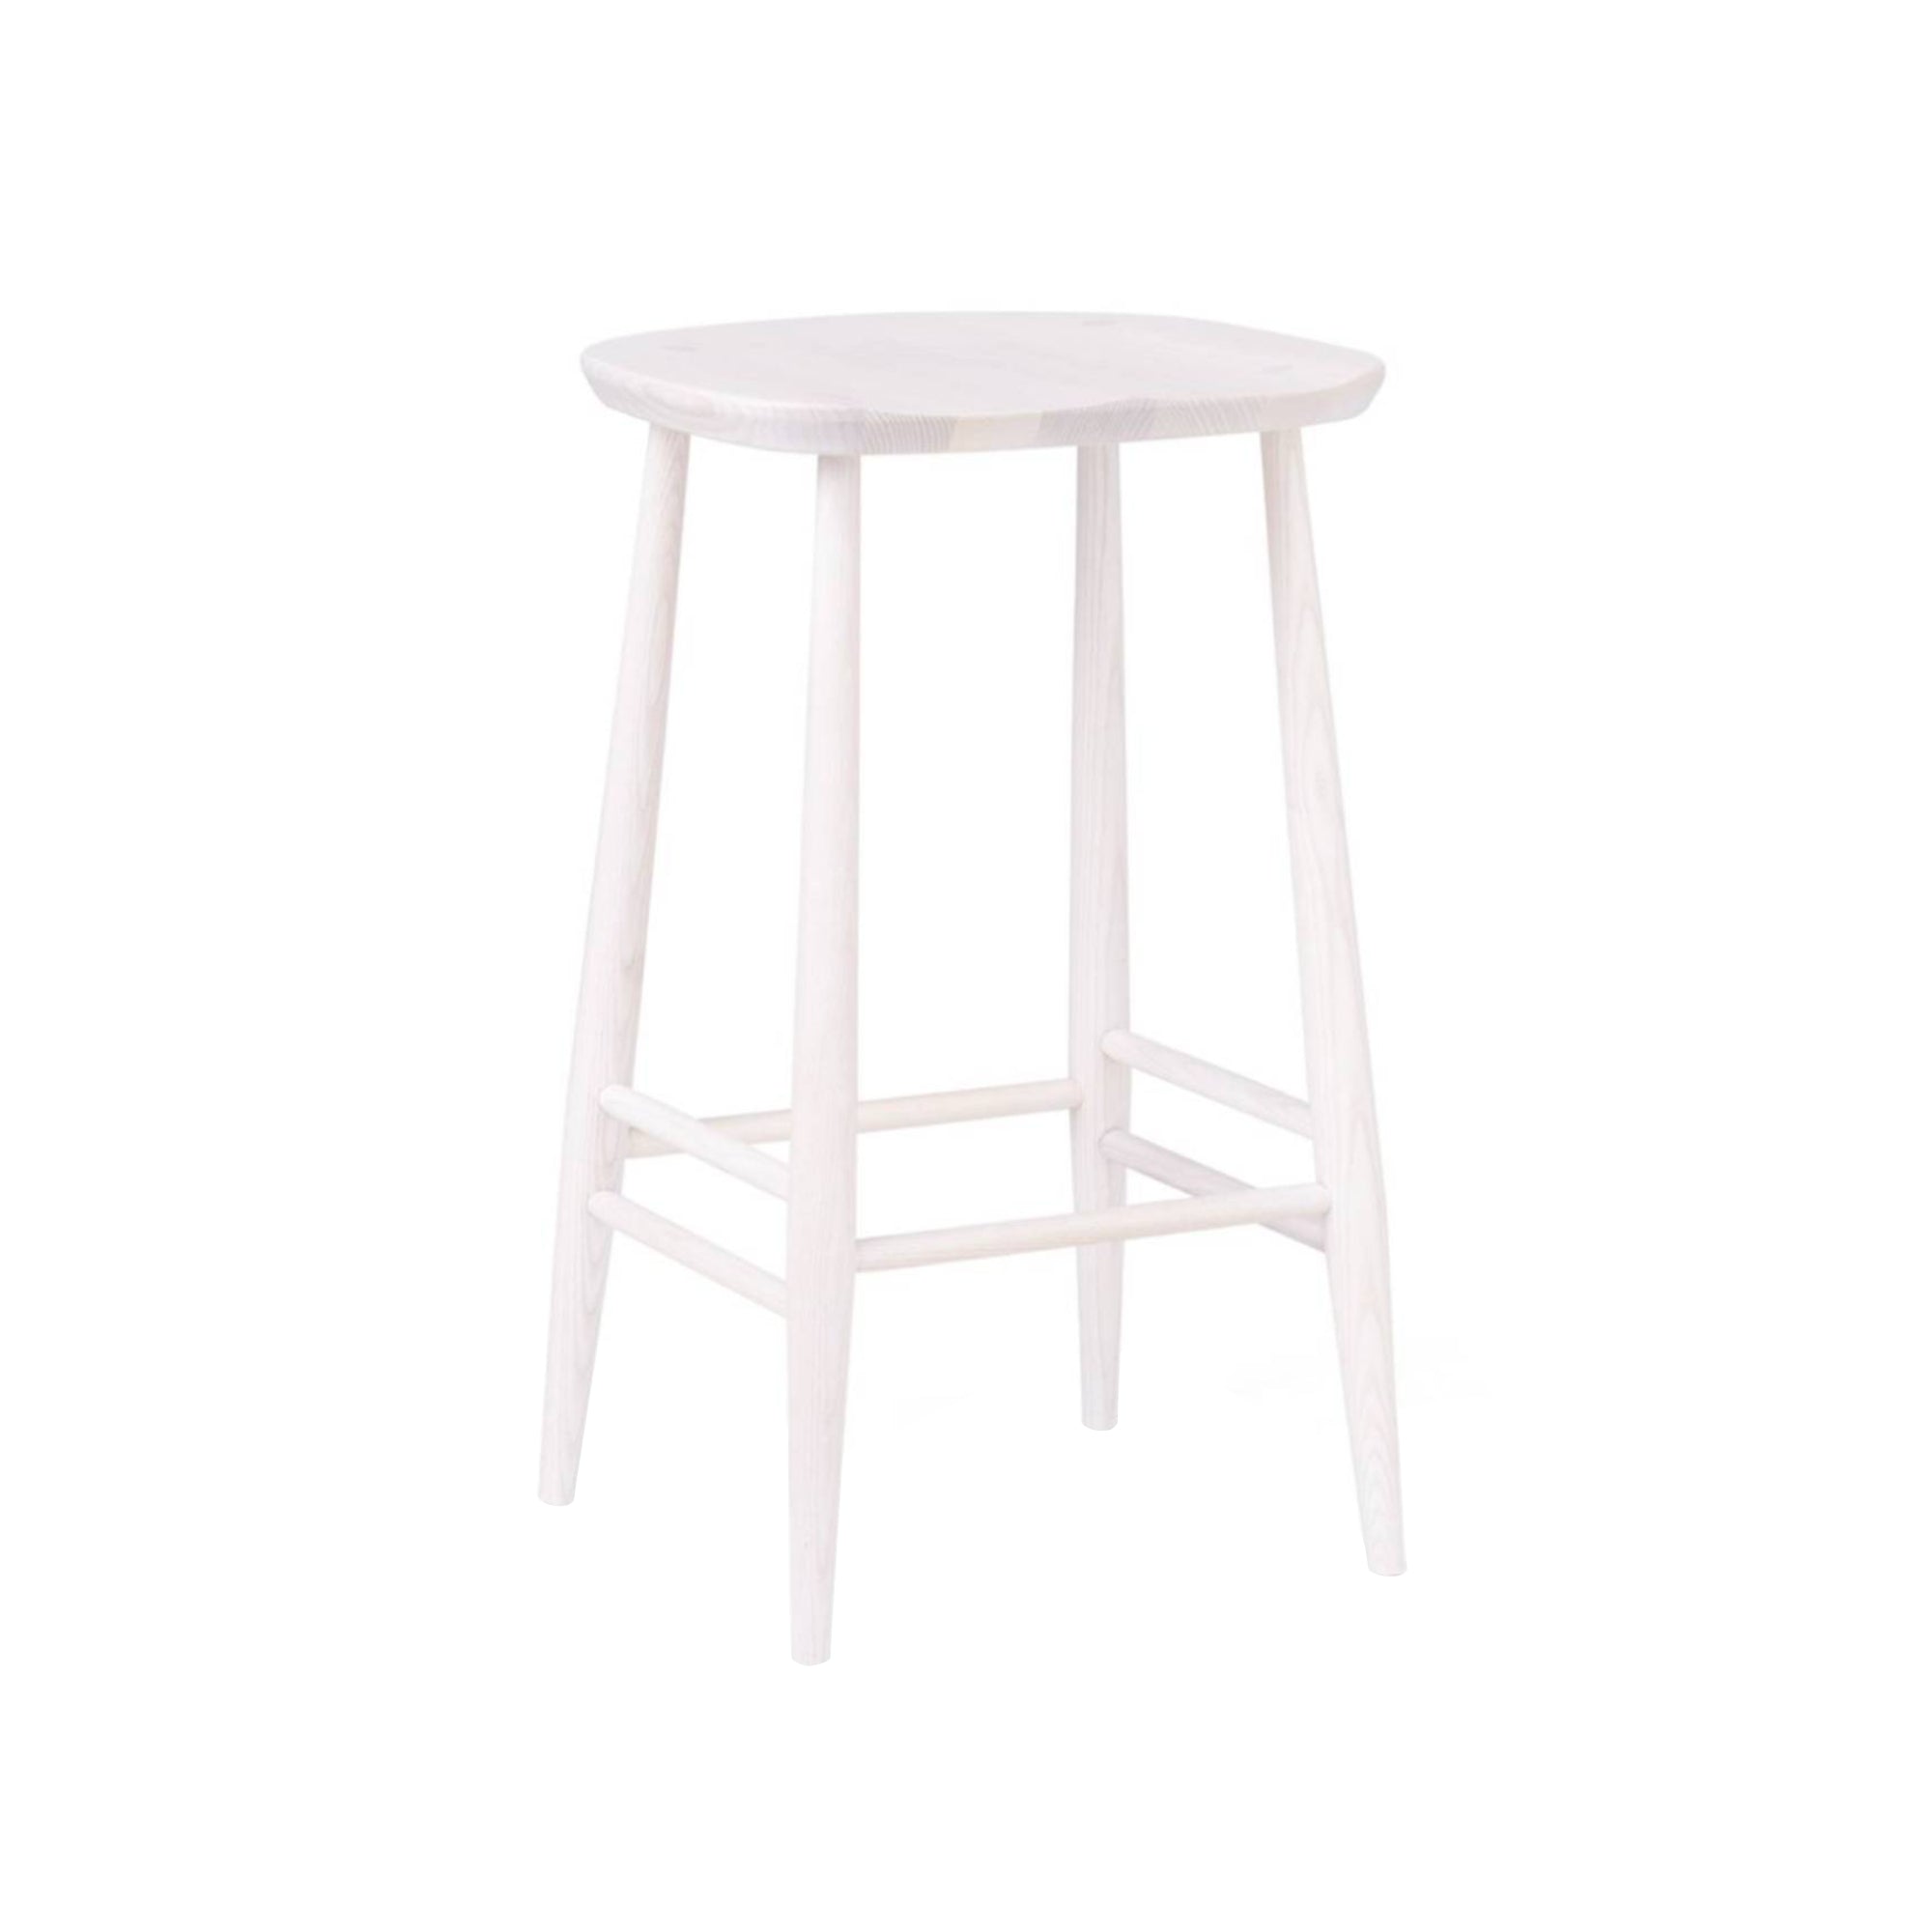 Originals Utility Bar + Counter Stool: Counter + Stained Off White